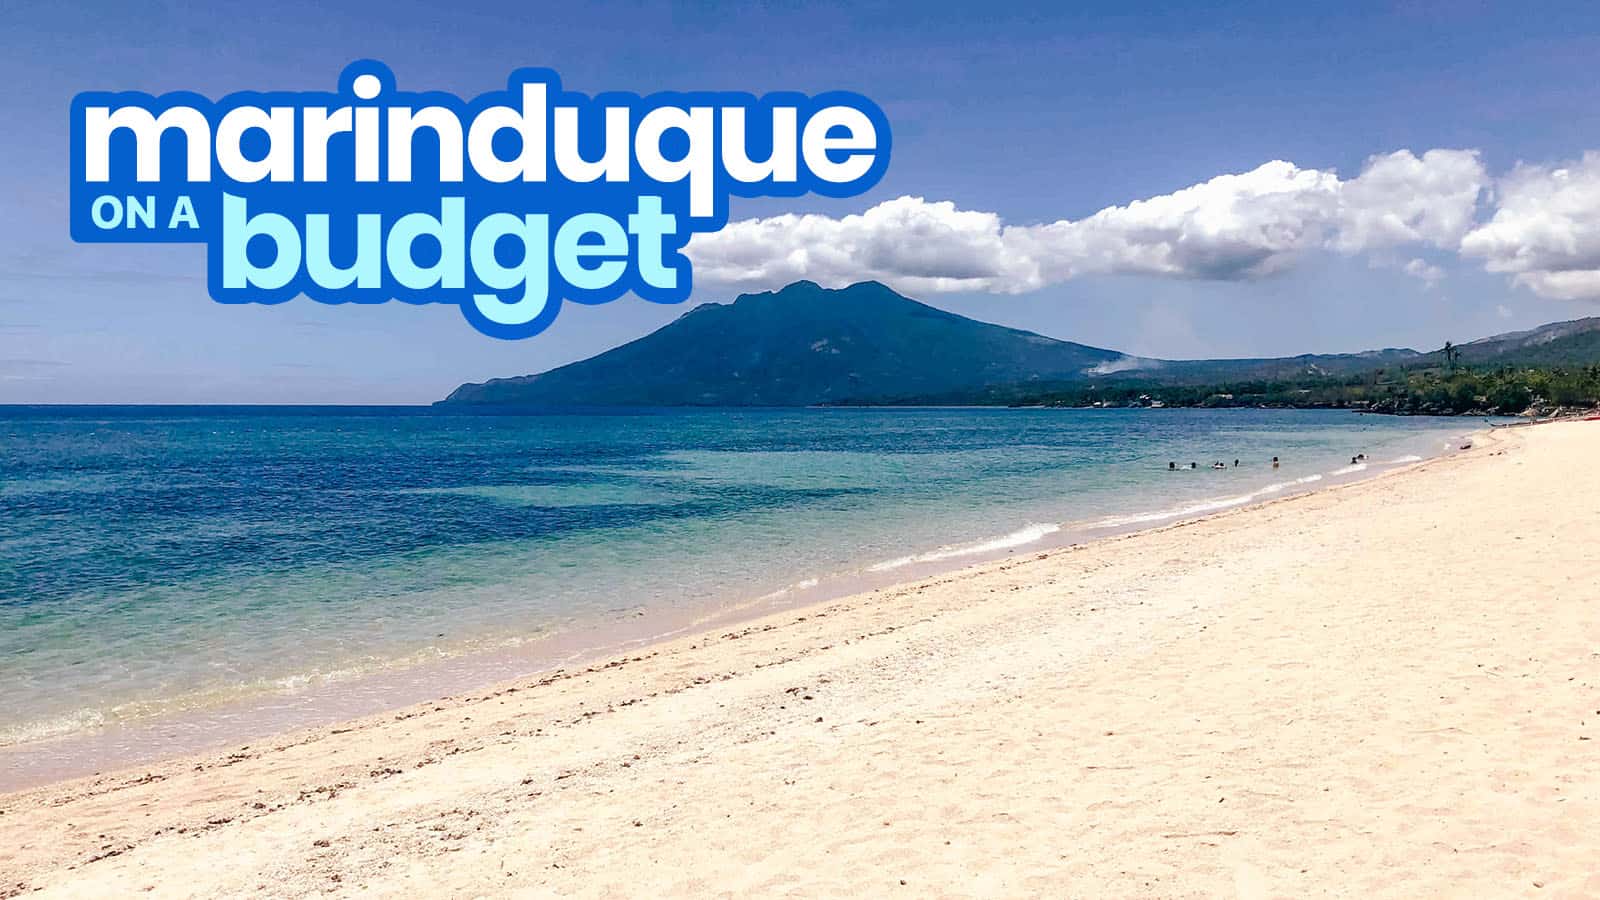 MARINDUQUE TRAVEL GUIDE with Budget Itinerary